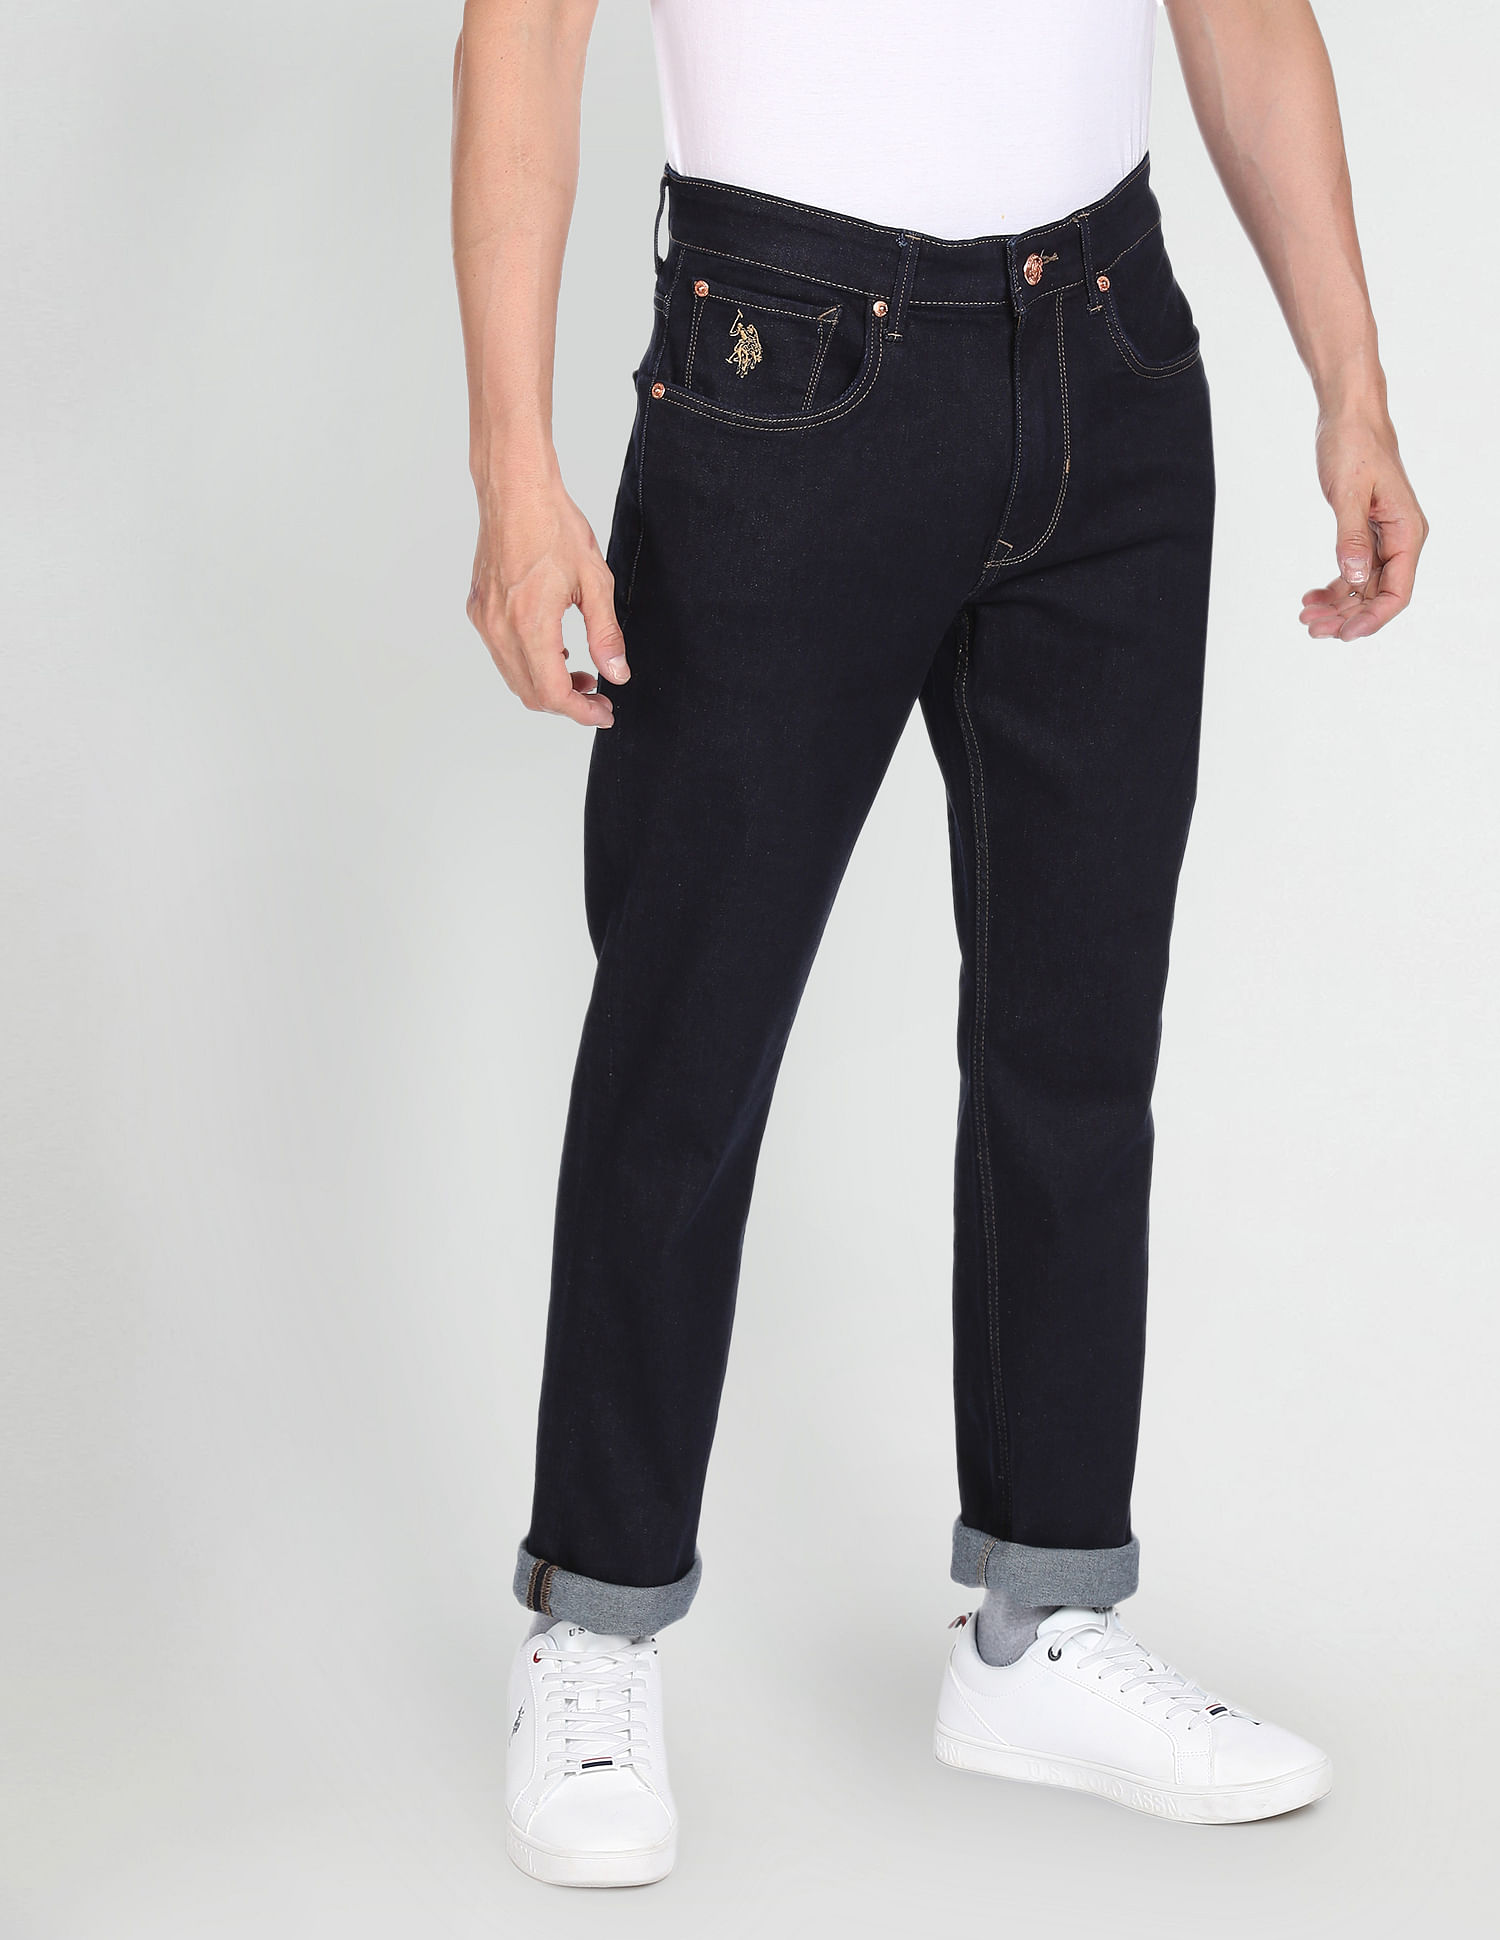 Buy U.S. Polo Assn. Denim Co. Rinsed Connor Bootcut Fit Jeans - NNNOW.com